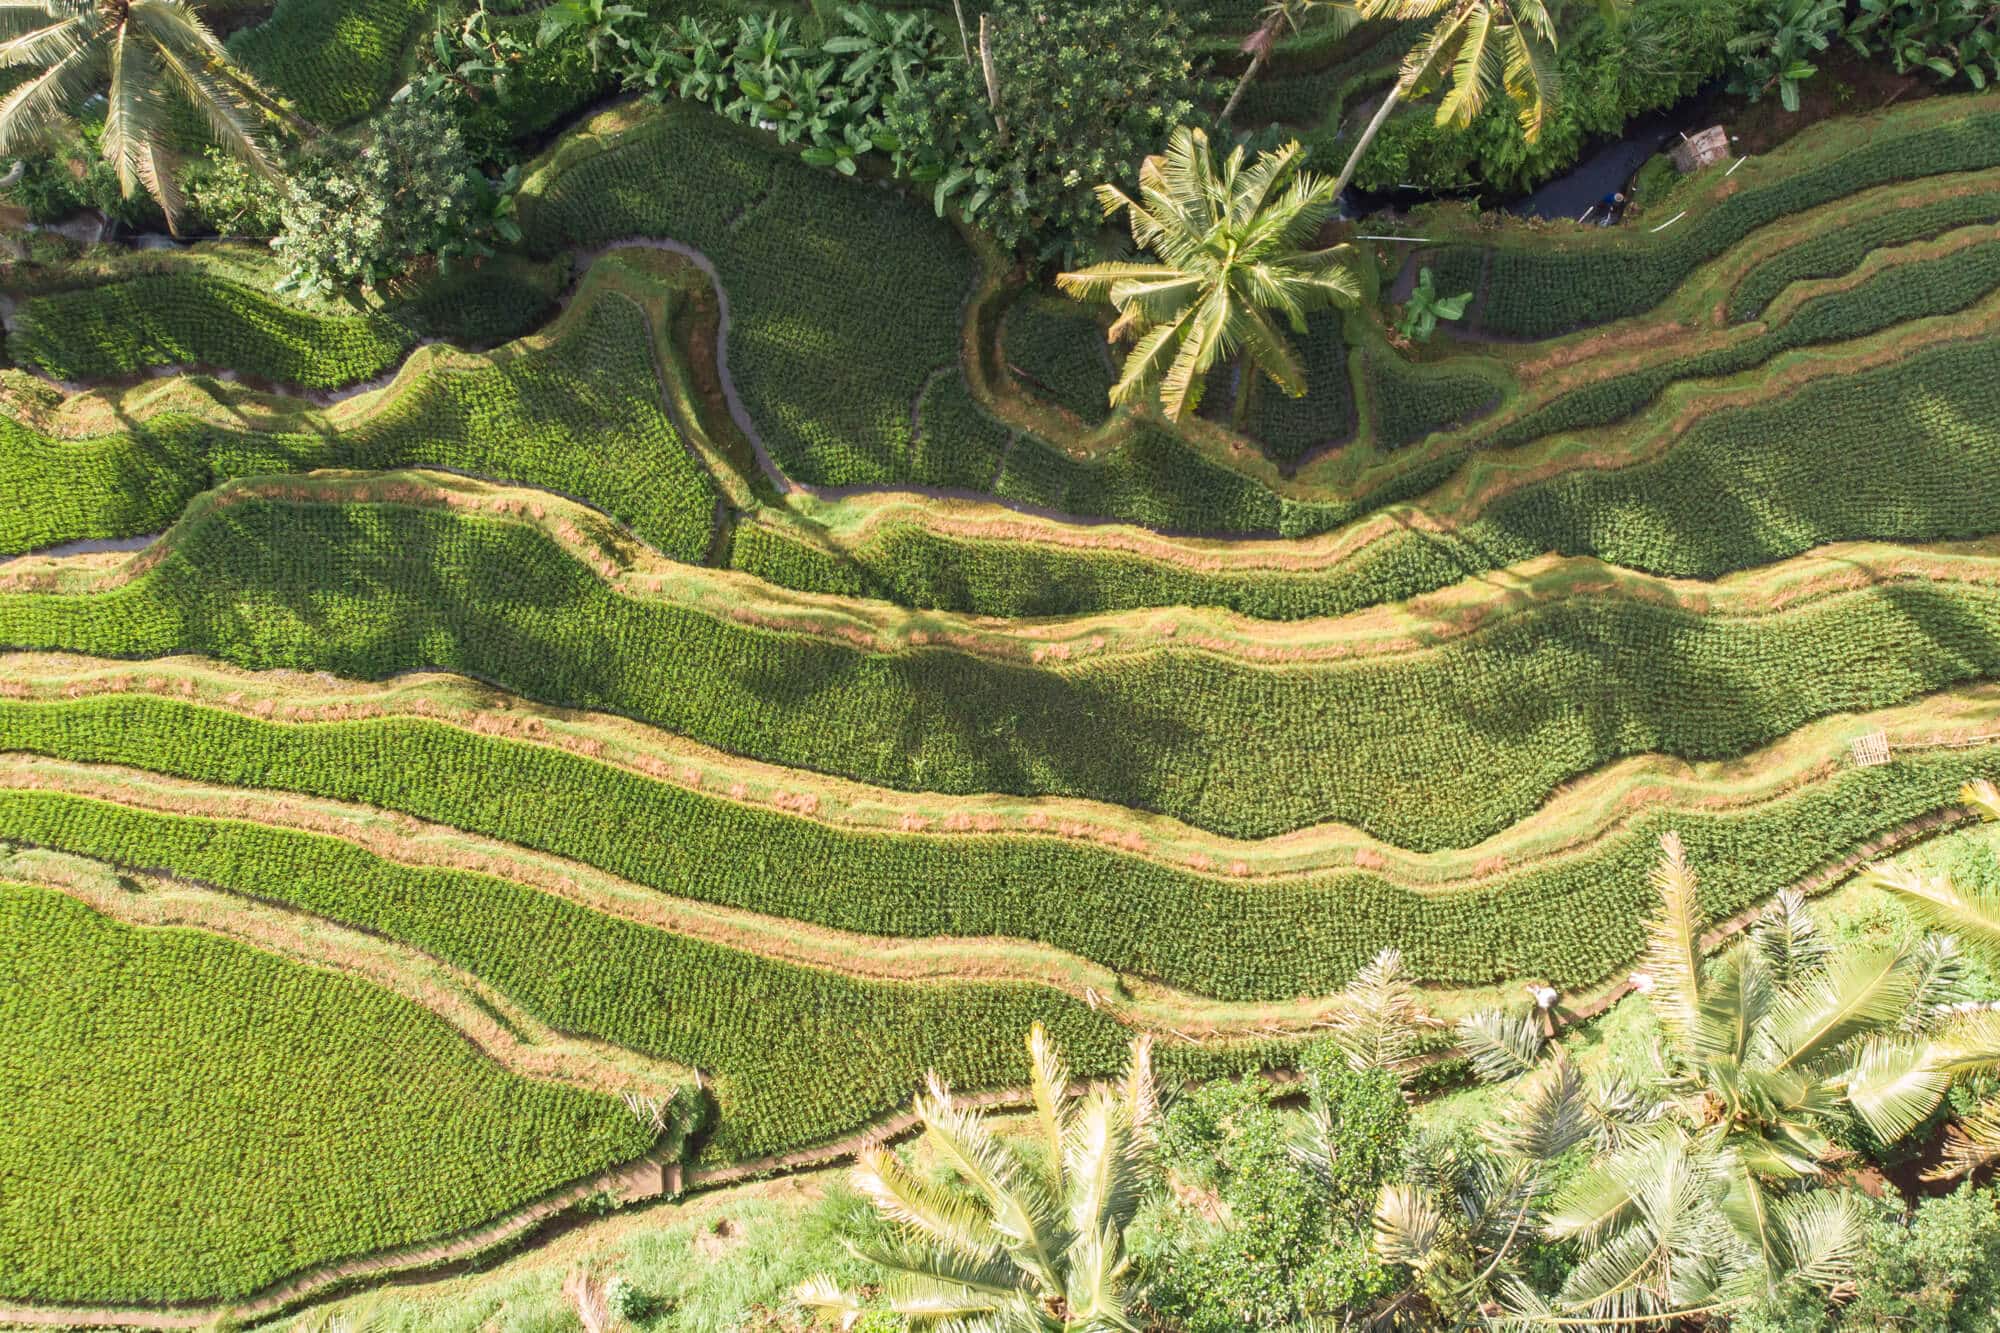 Drone view of the Instafamous sunrise photo location in Tegalalang Rice Terrace, Ubud